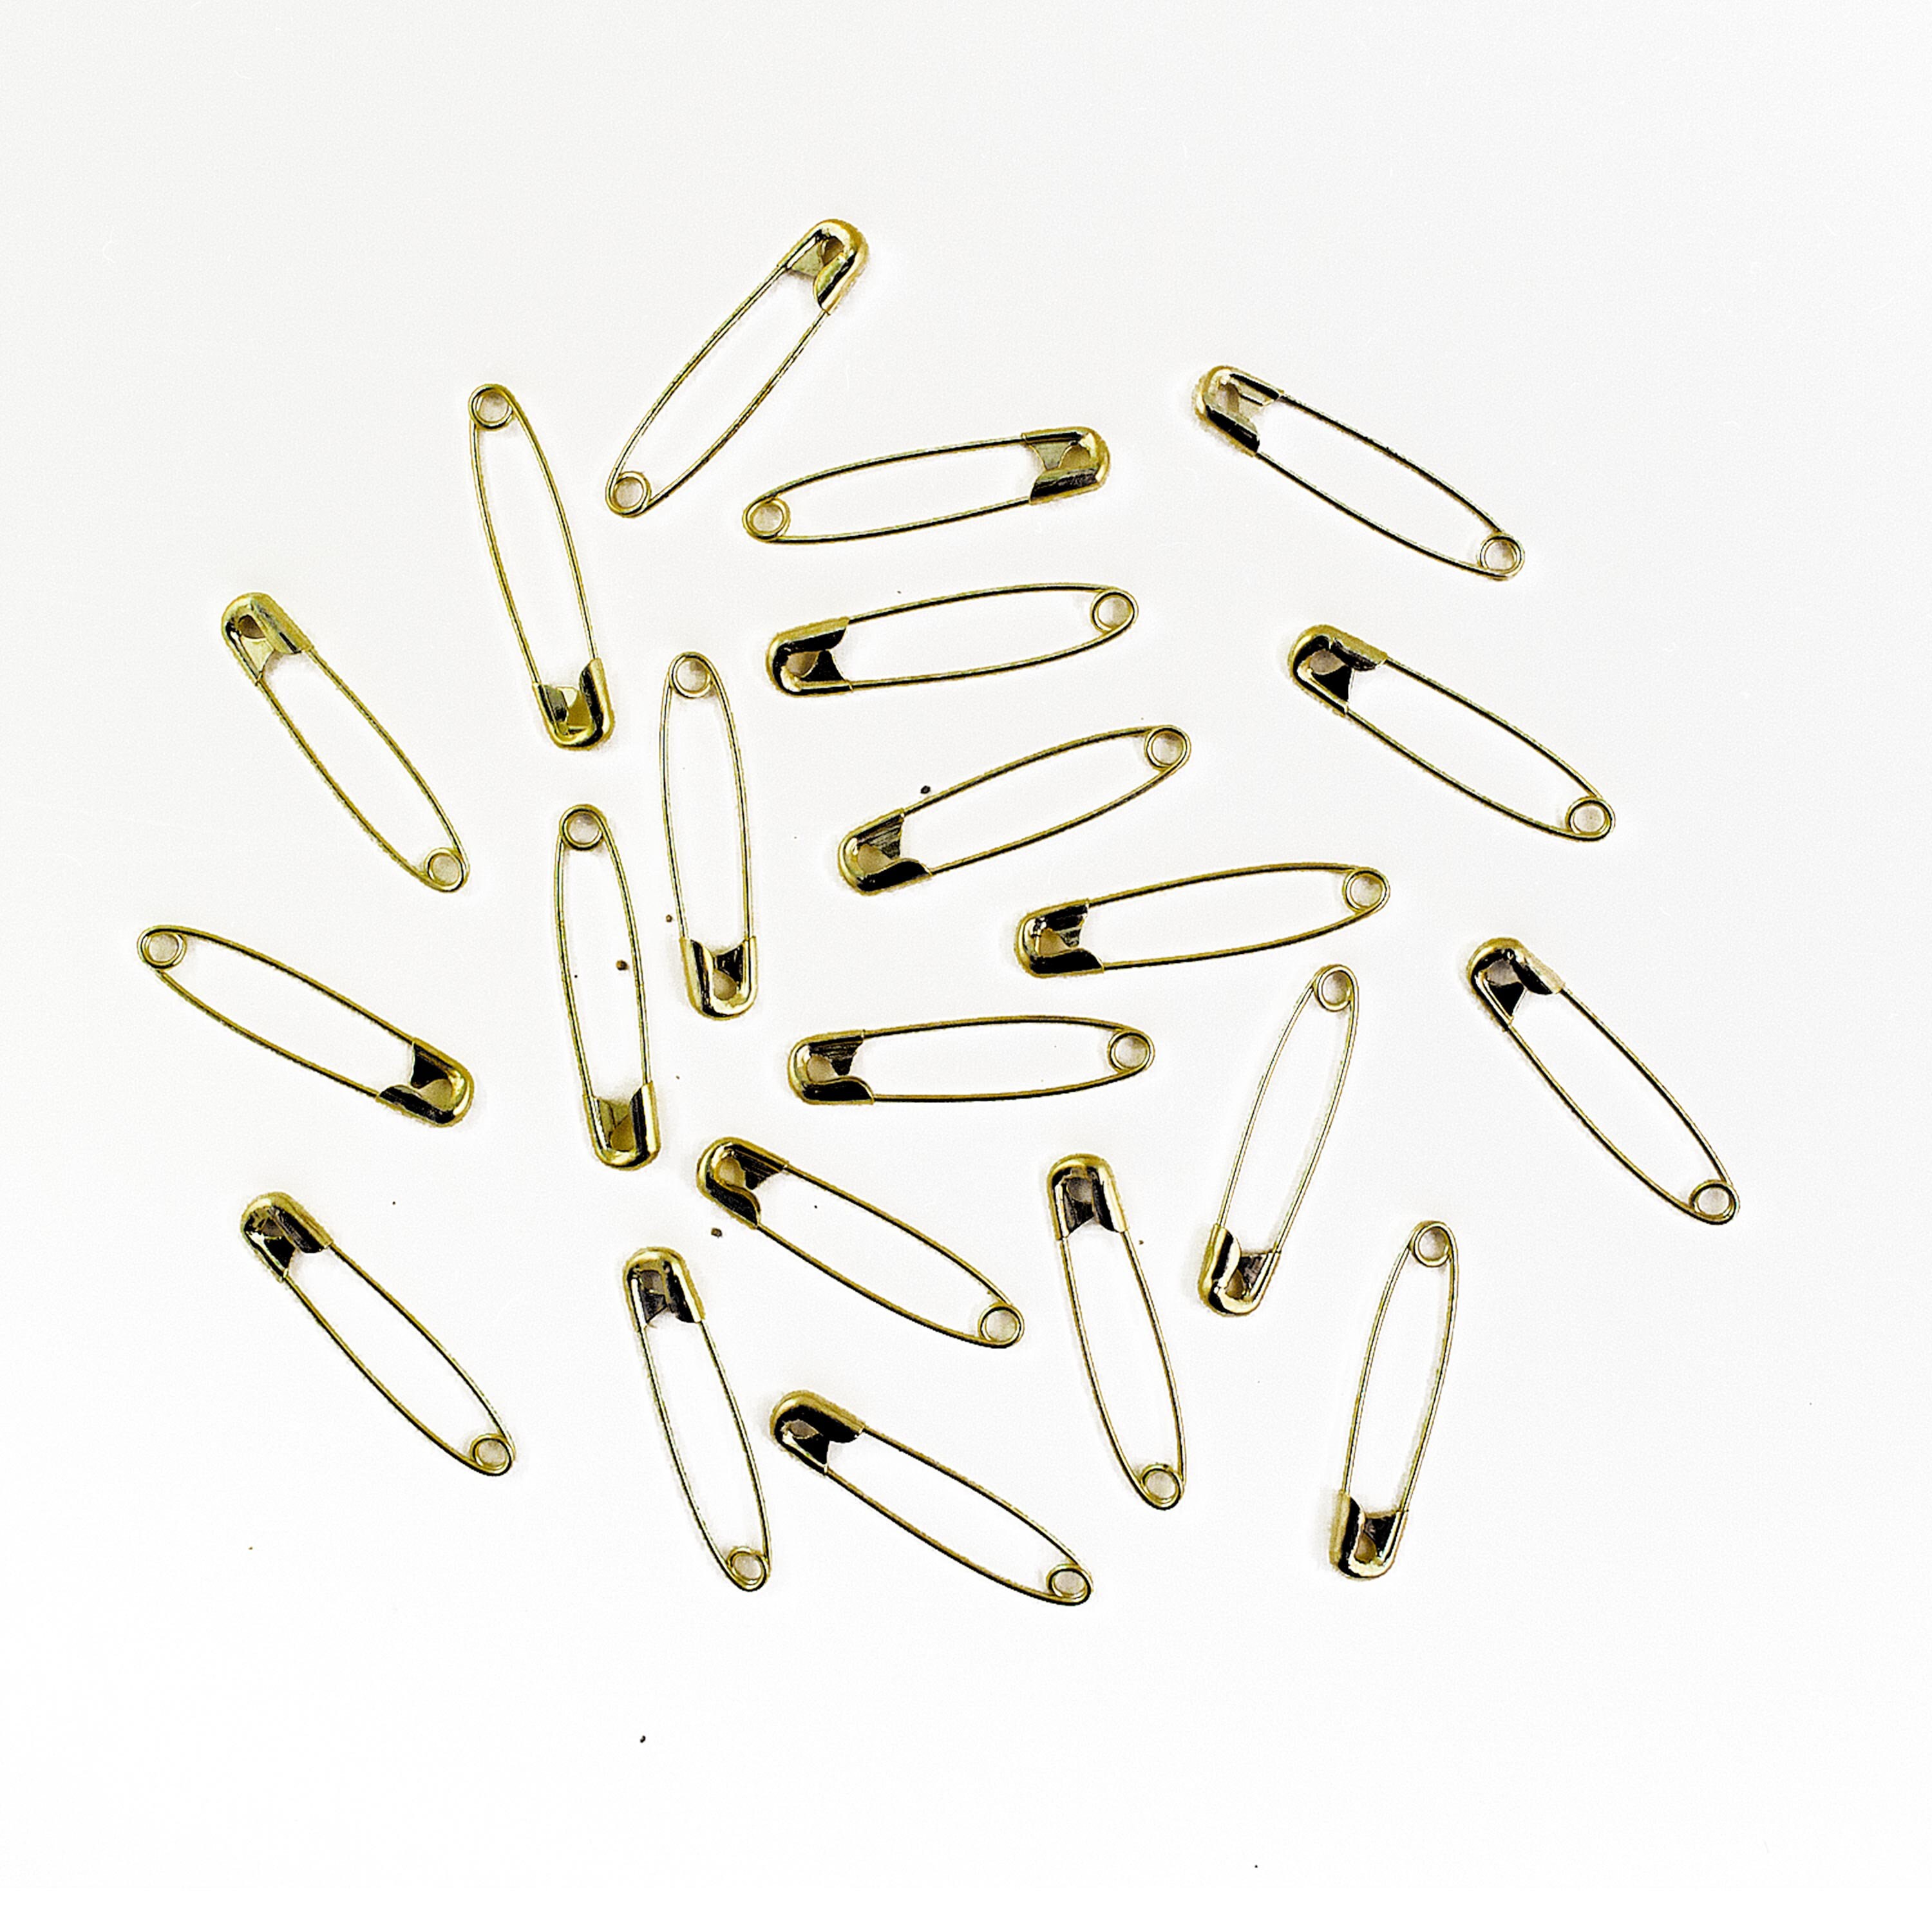 Coilless Safety Pins, 1-1/2 Inch, Gold-Tone Metal (50 Pieces)